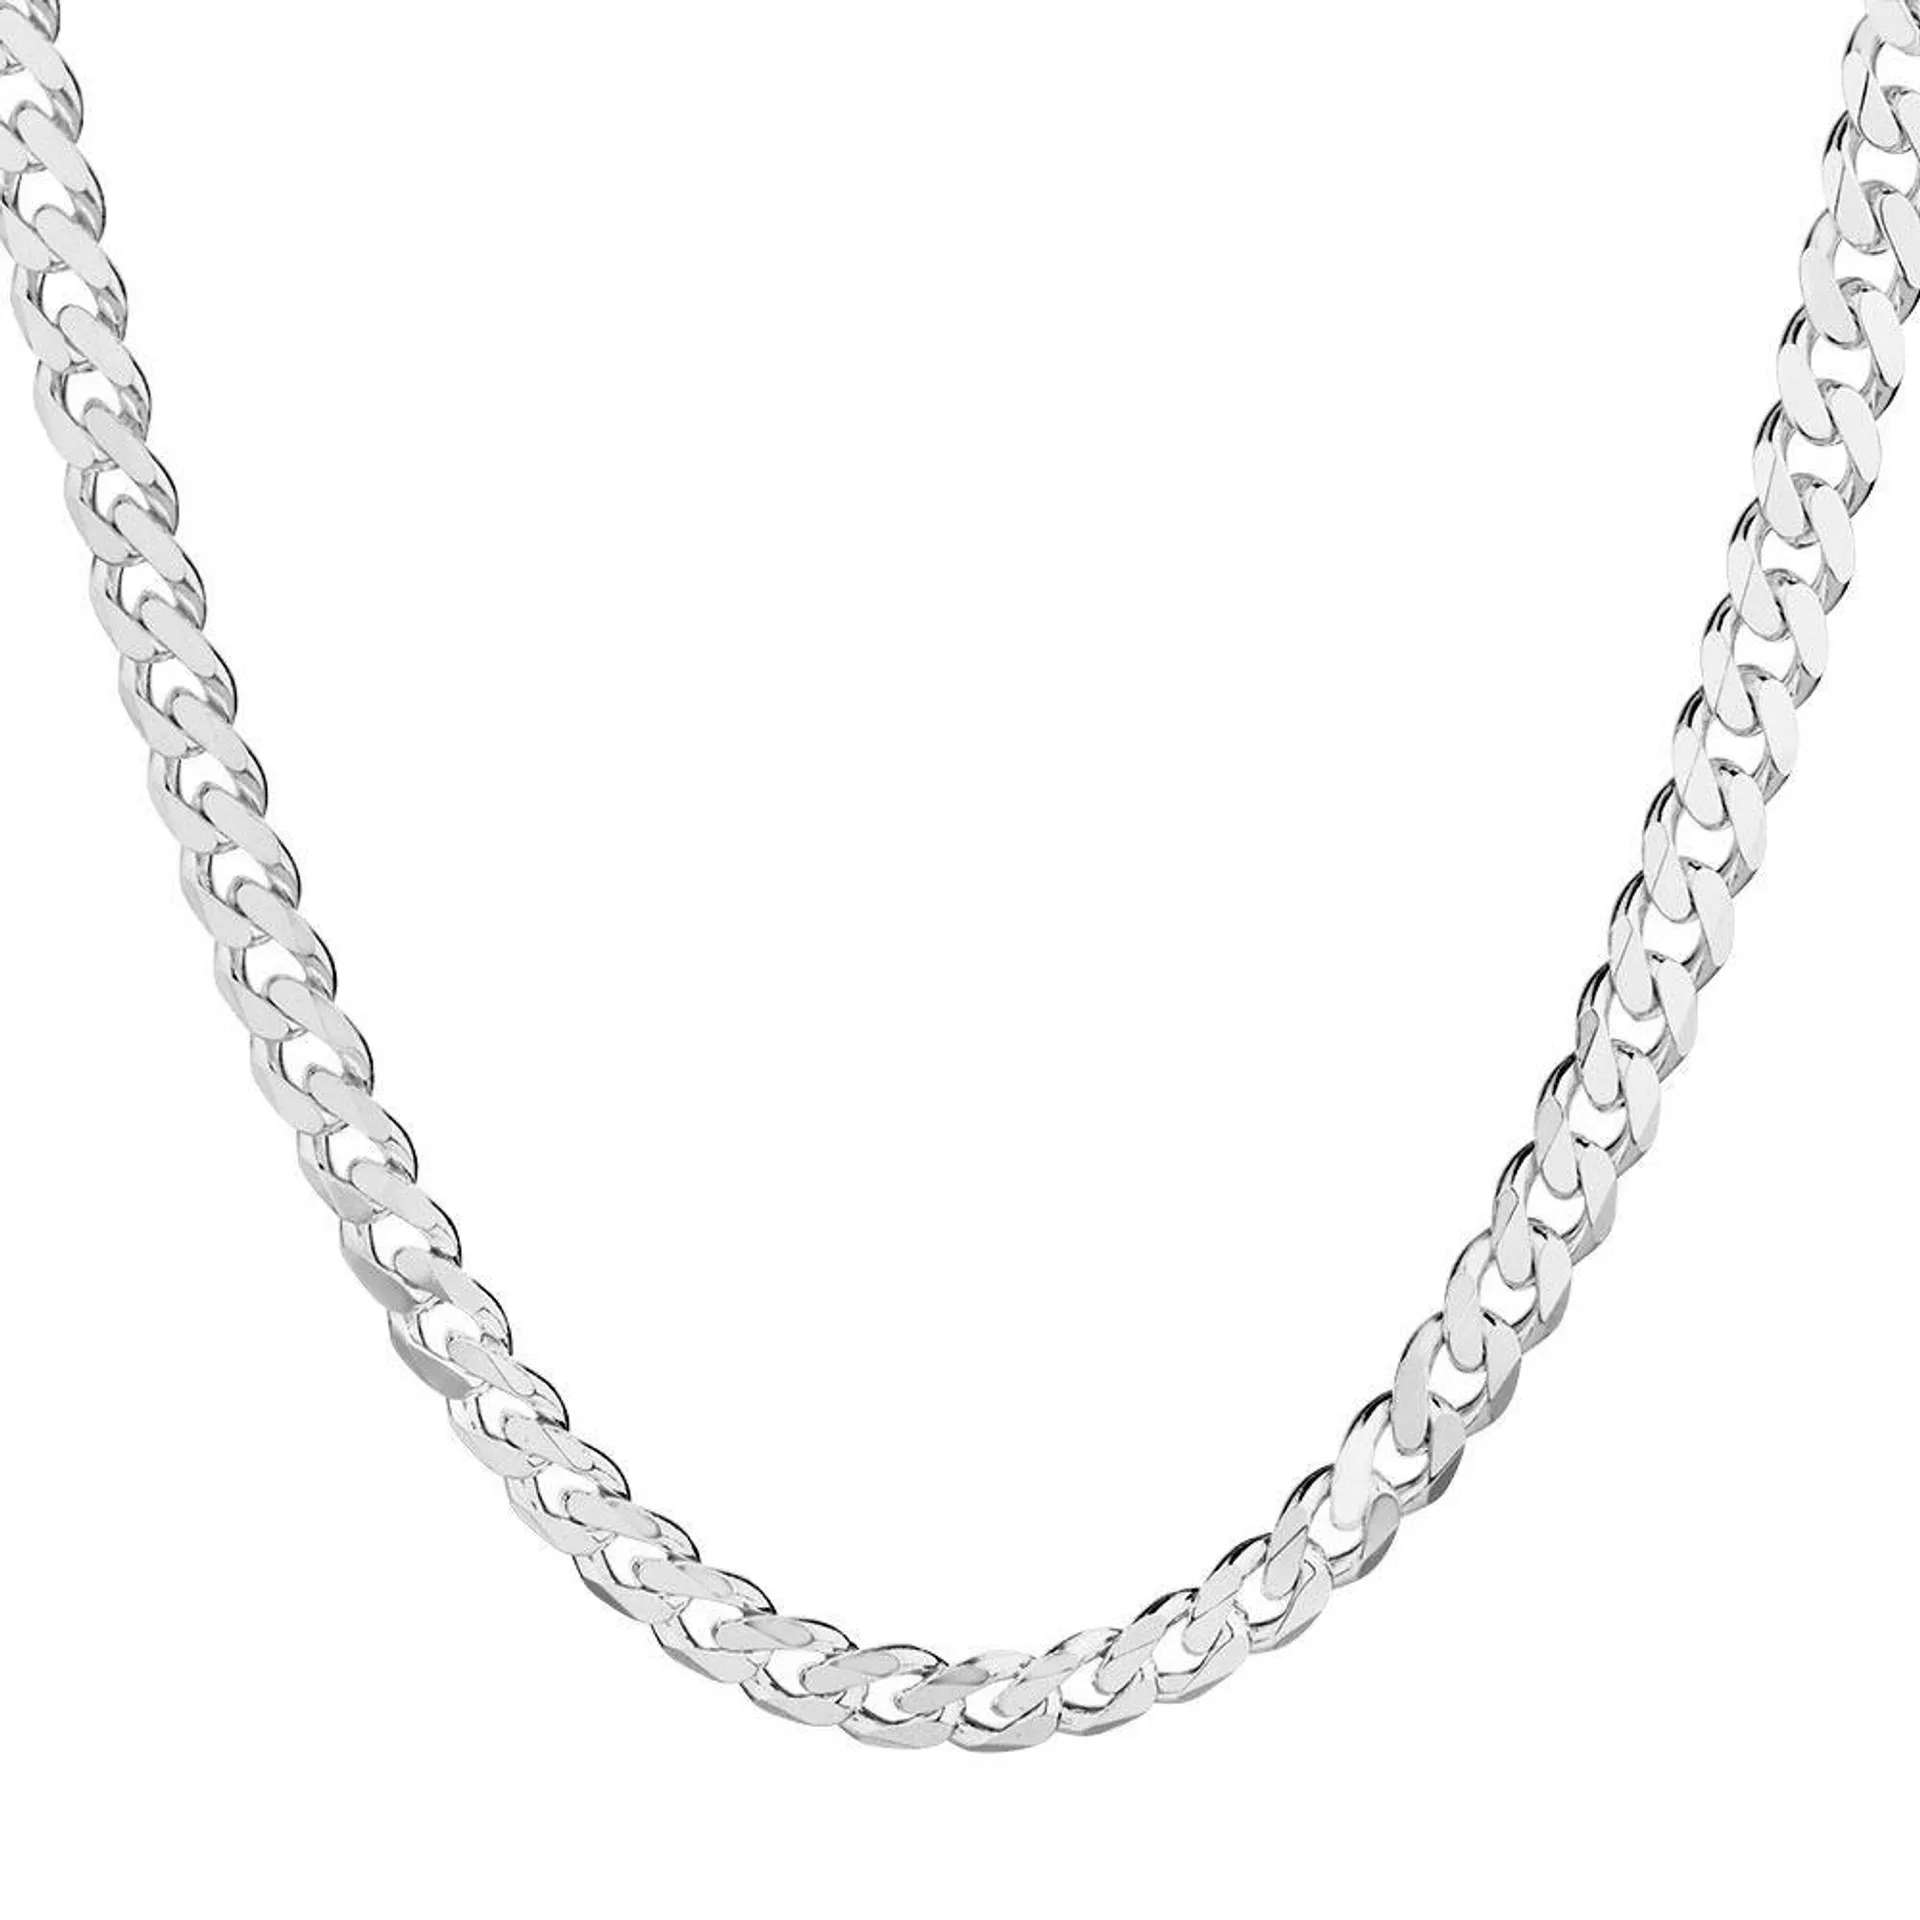 55cm (22") 6.5mm Width Curb Chain in Sterling Silver